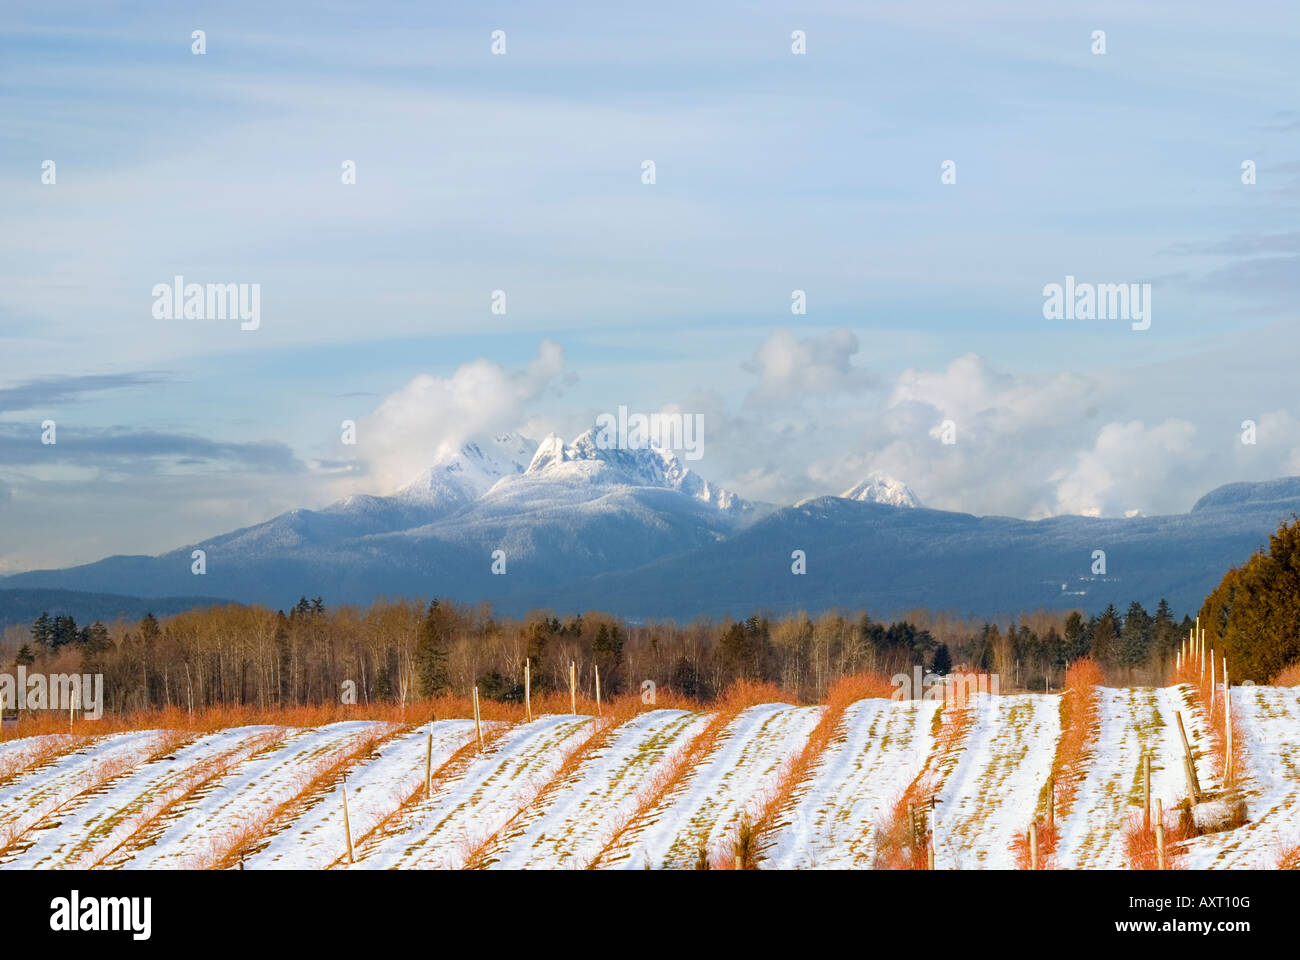 Snow blankets a Fraser Valley blueberry field while a storm clears Golden Ears Mountain in the far distance Stock Photo